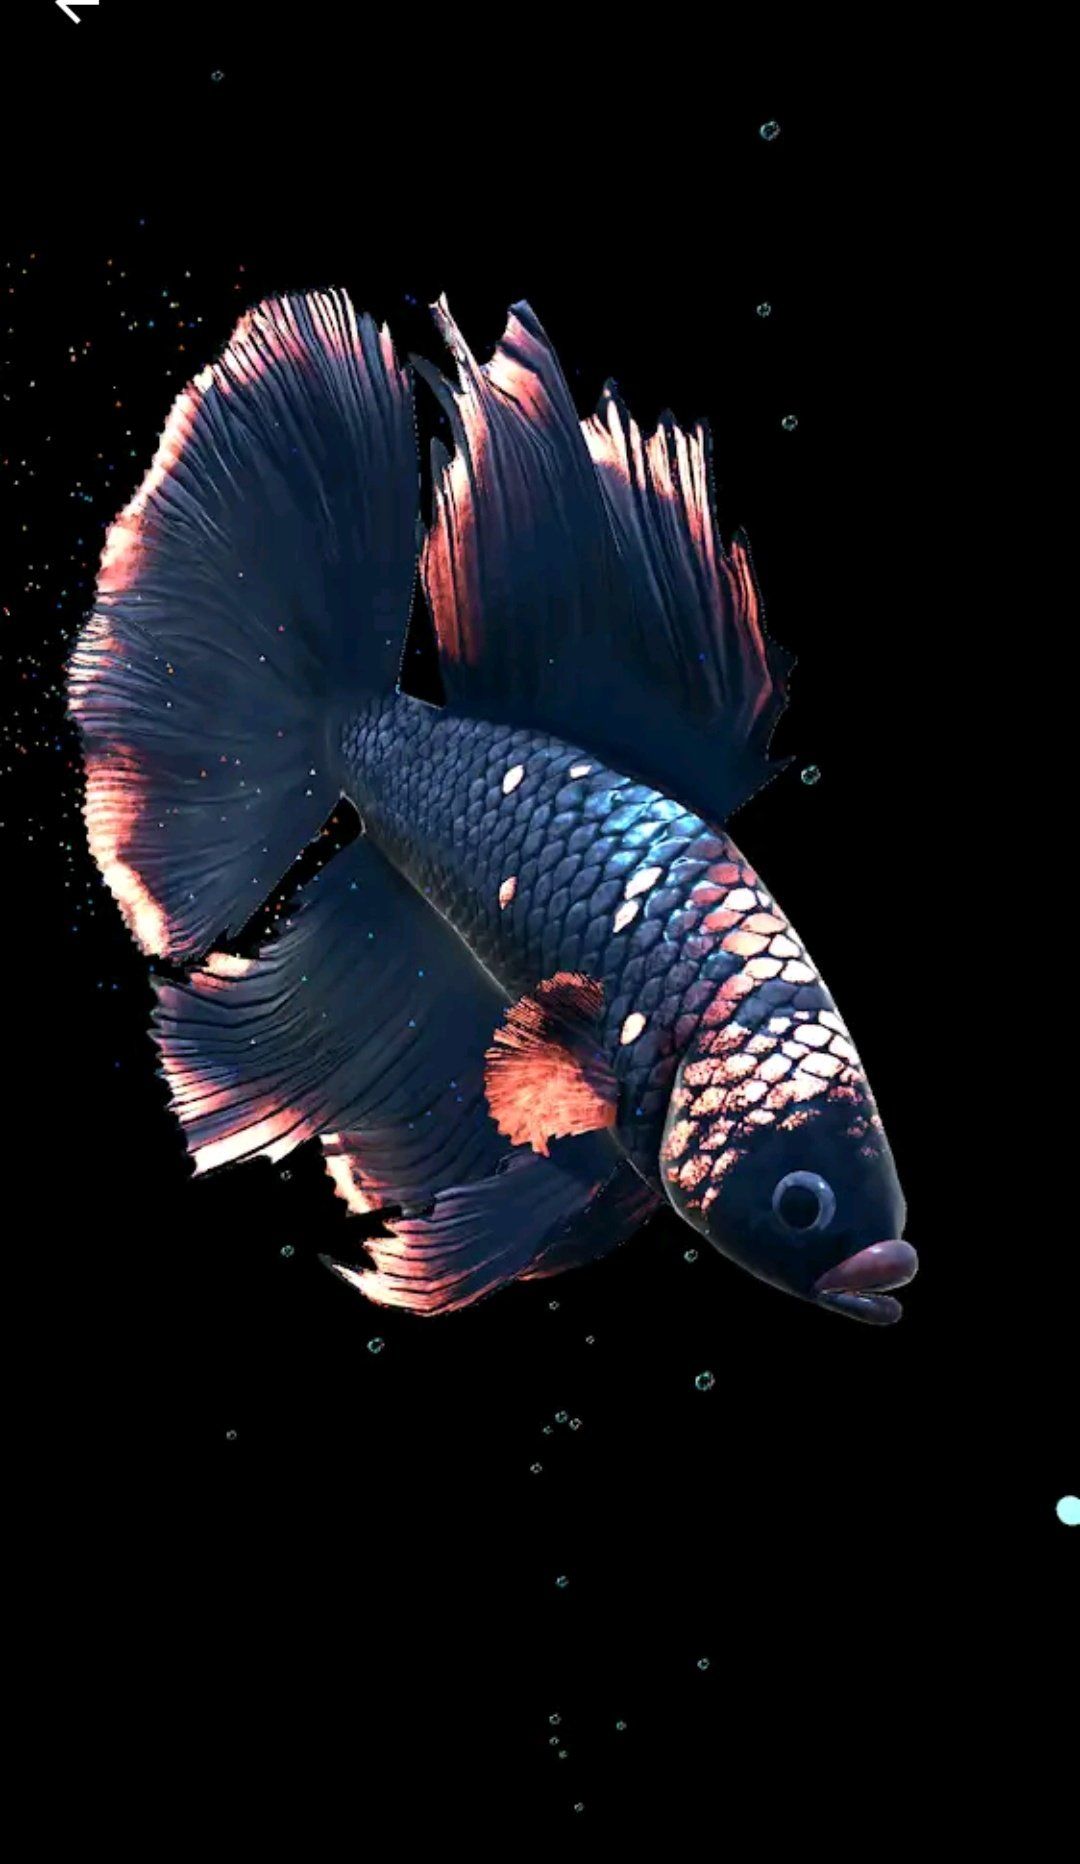 Betta Fish Live Wallpaper your screen attractive with live wallpaper